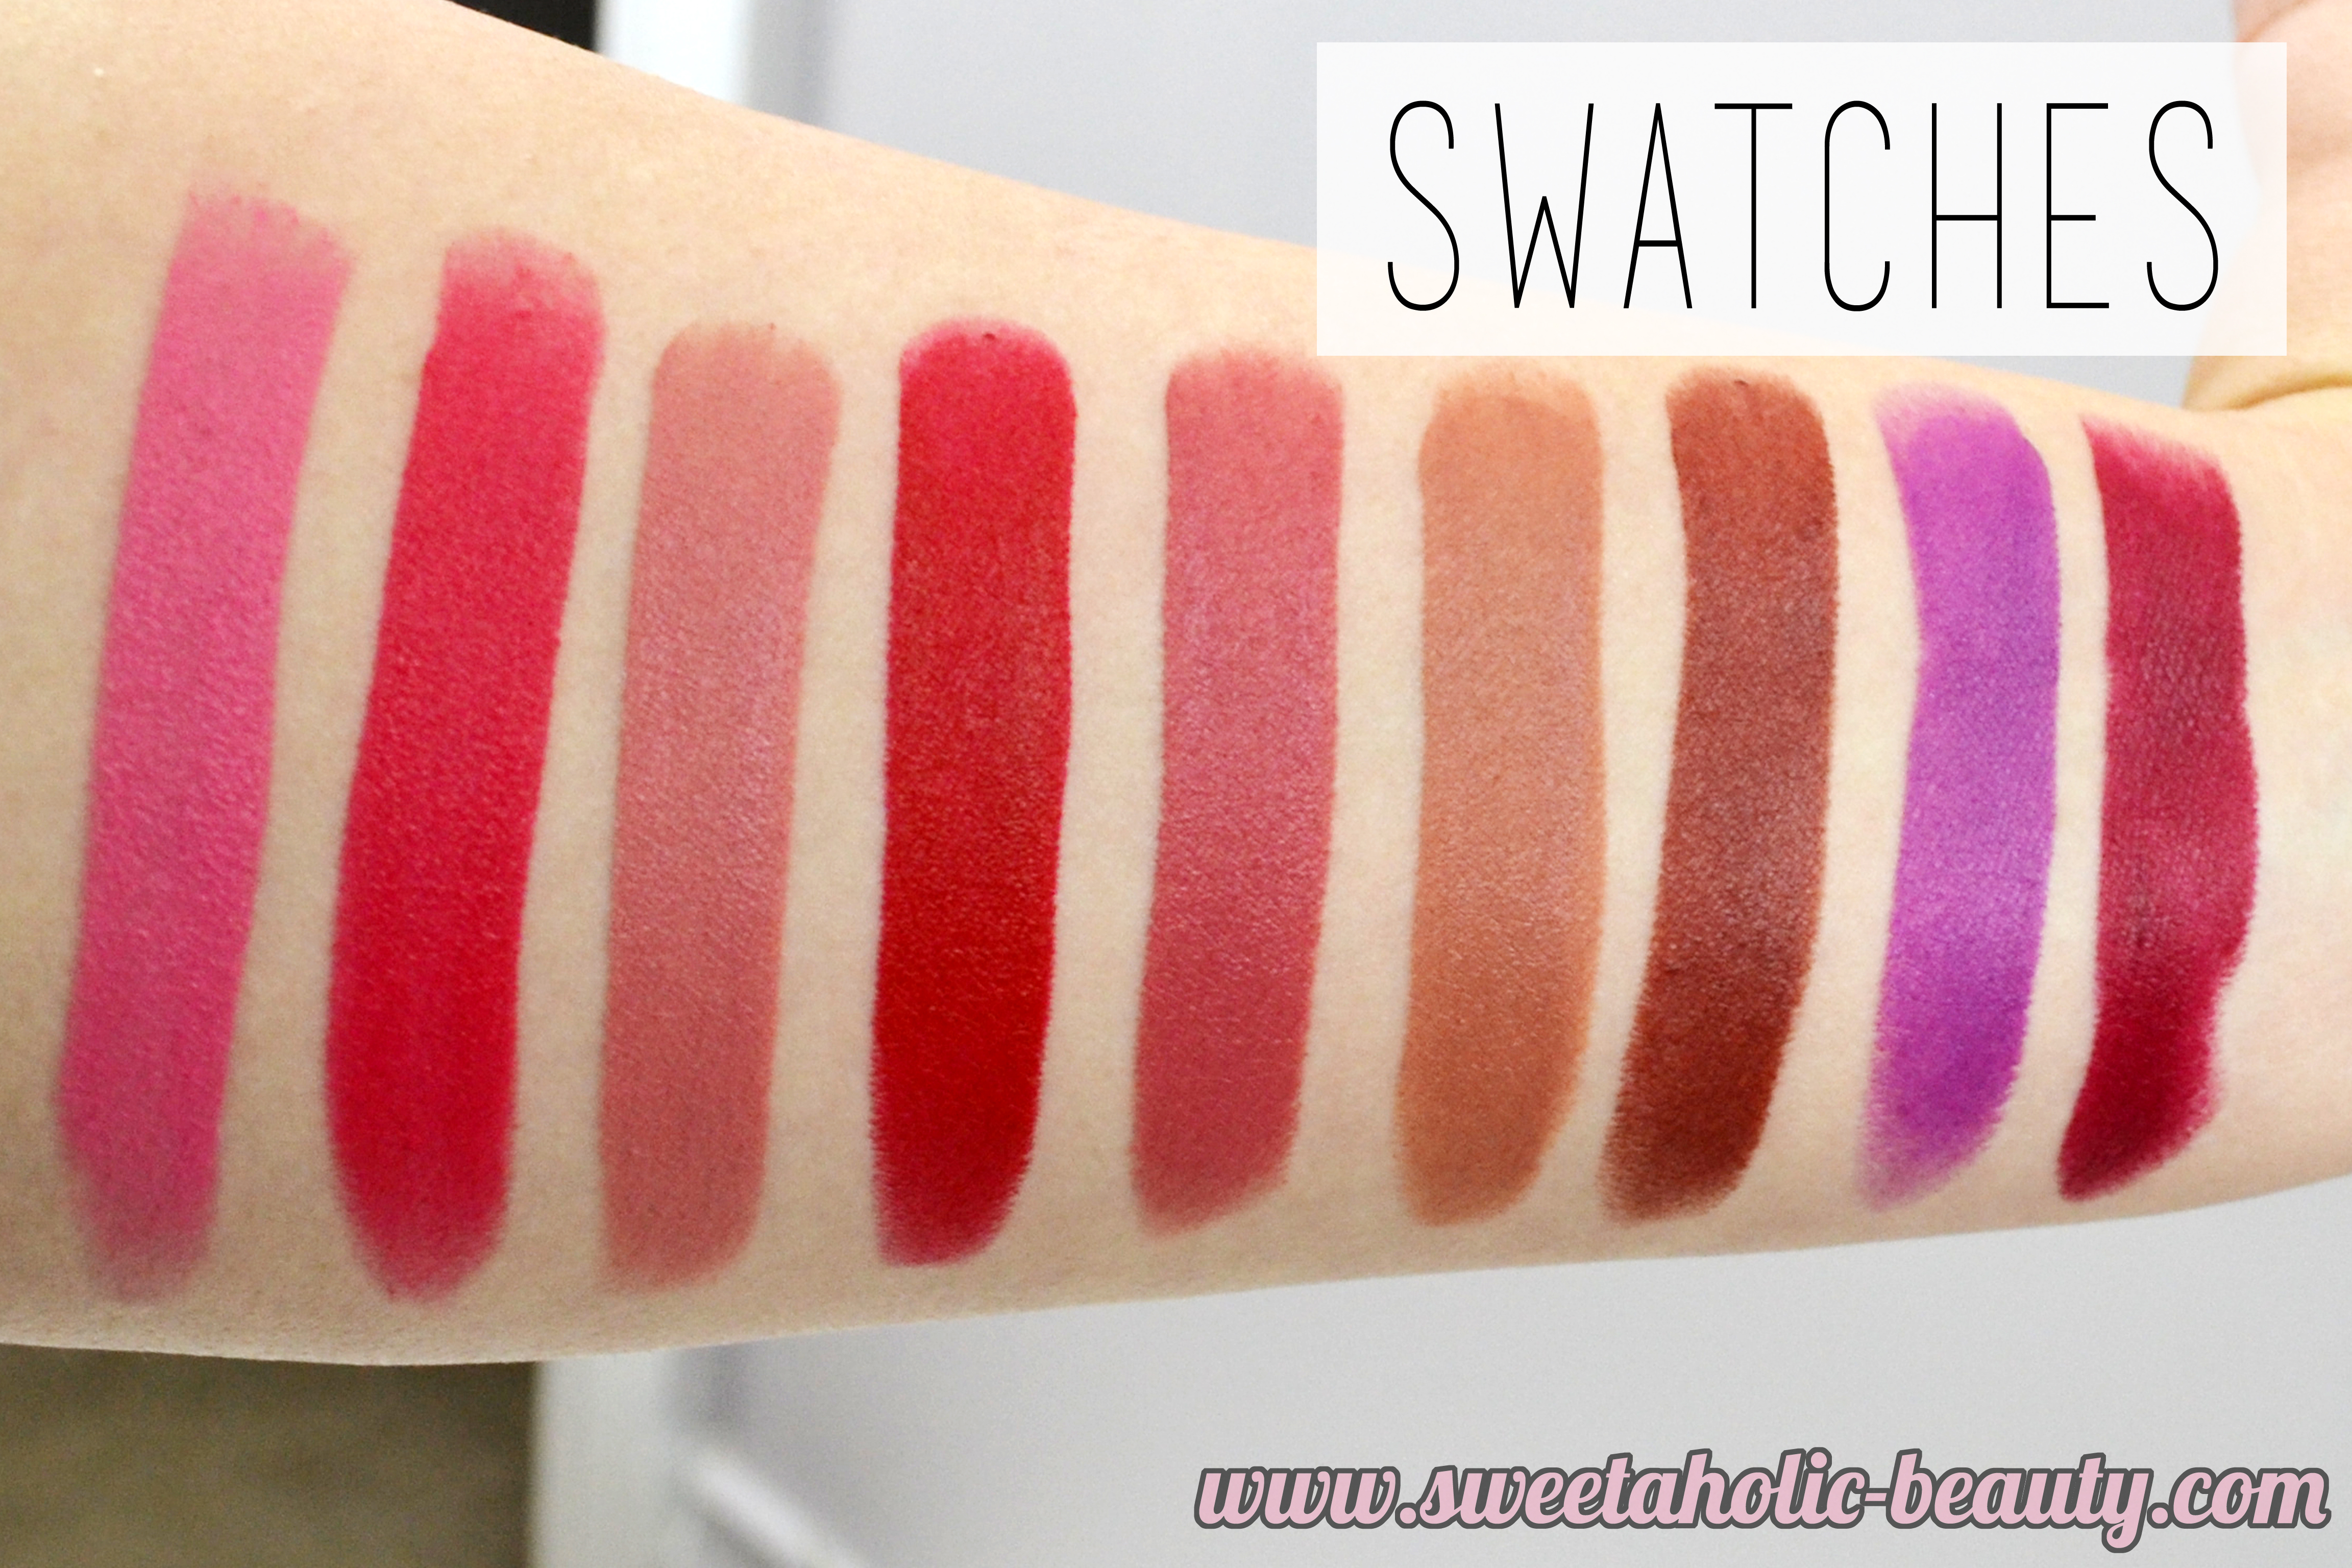 Rimmel London The Only 1 Matte Lipstick Collection Review & Swatches - Sweetaholic Beauty